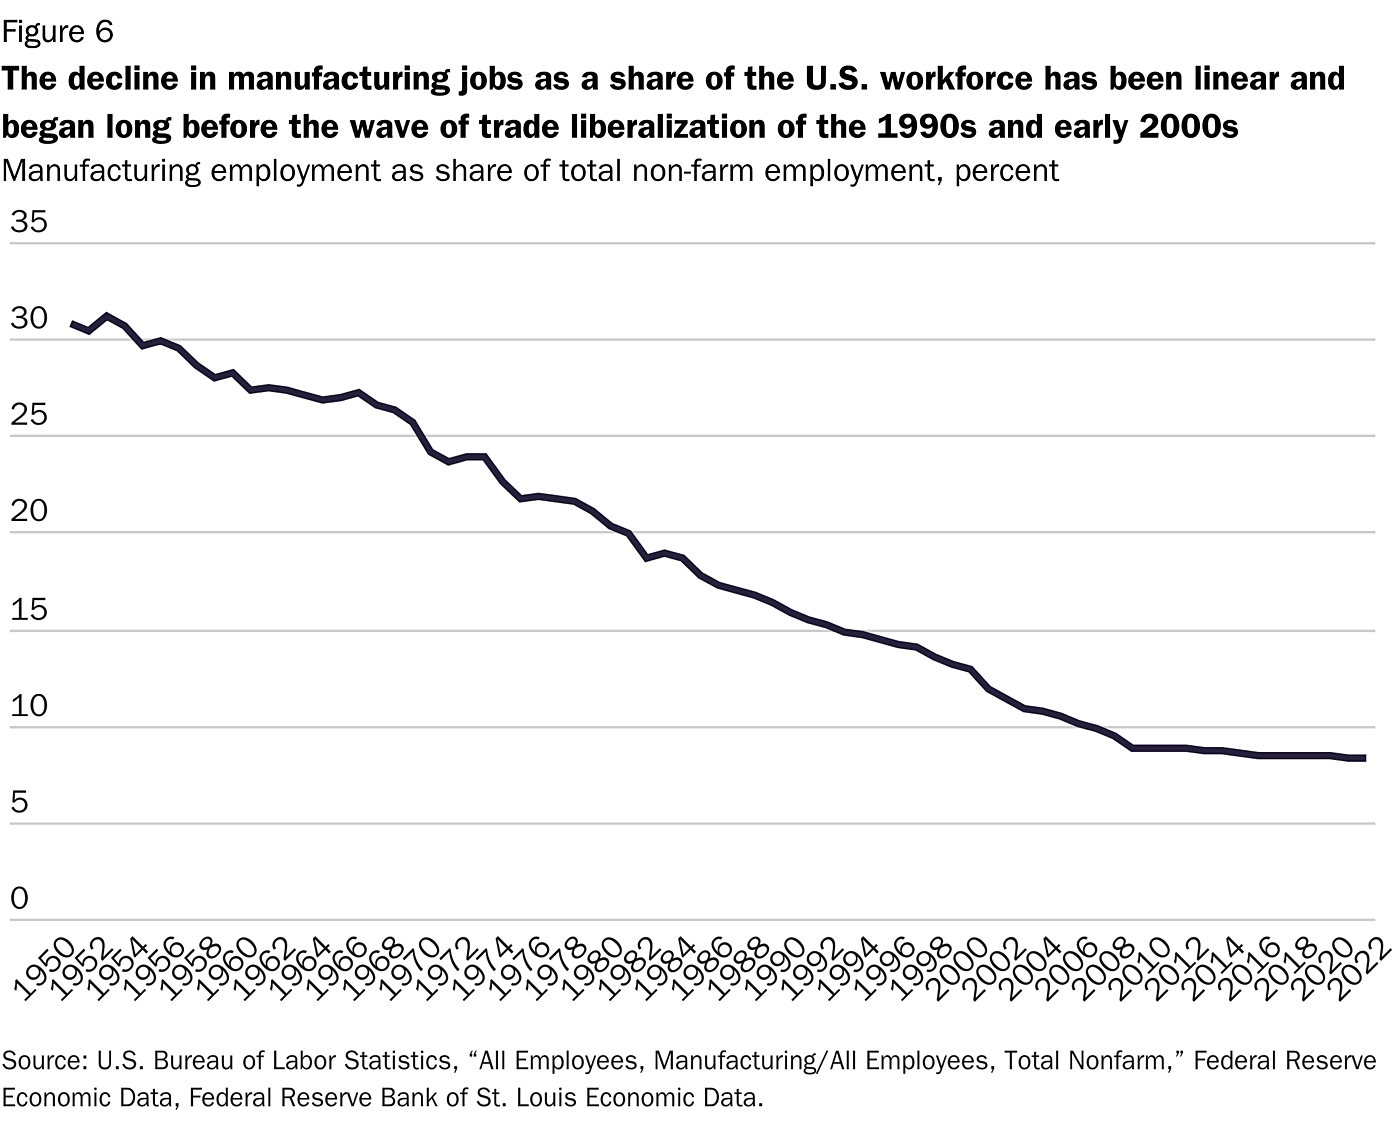 figure-6-the-decline-in-manufacturing-jobs-as-a-share-of-the-us-workforce-has-been-linear-and-began-long-before-the-wave-of-trade-liberalization-of-the-1990s-and-early-2000s